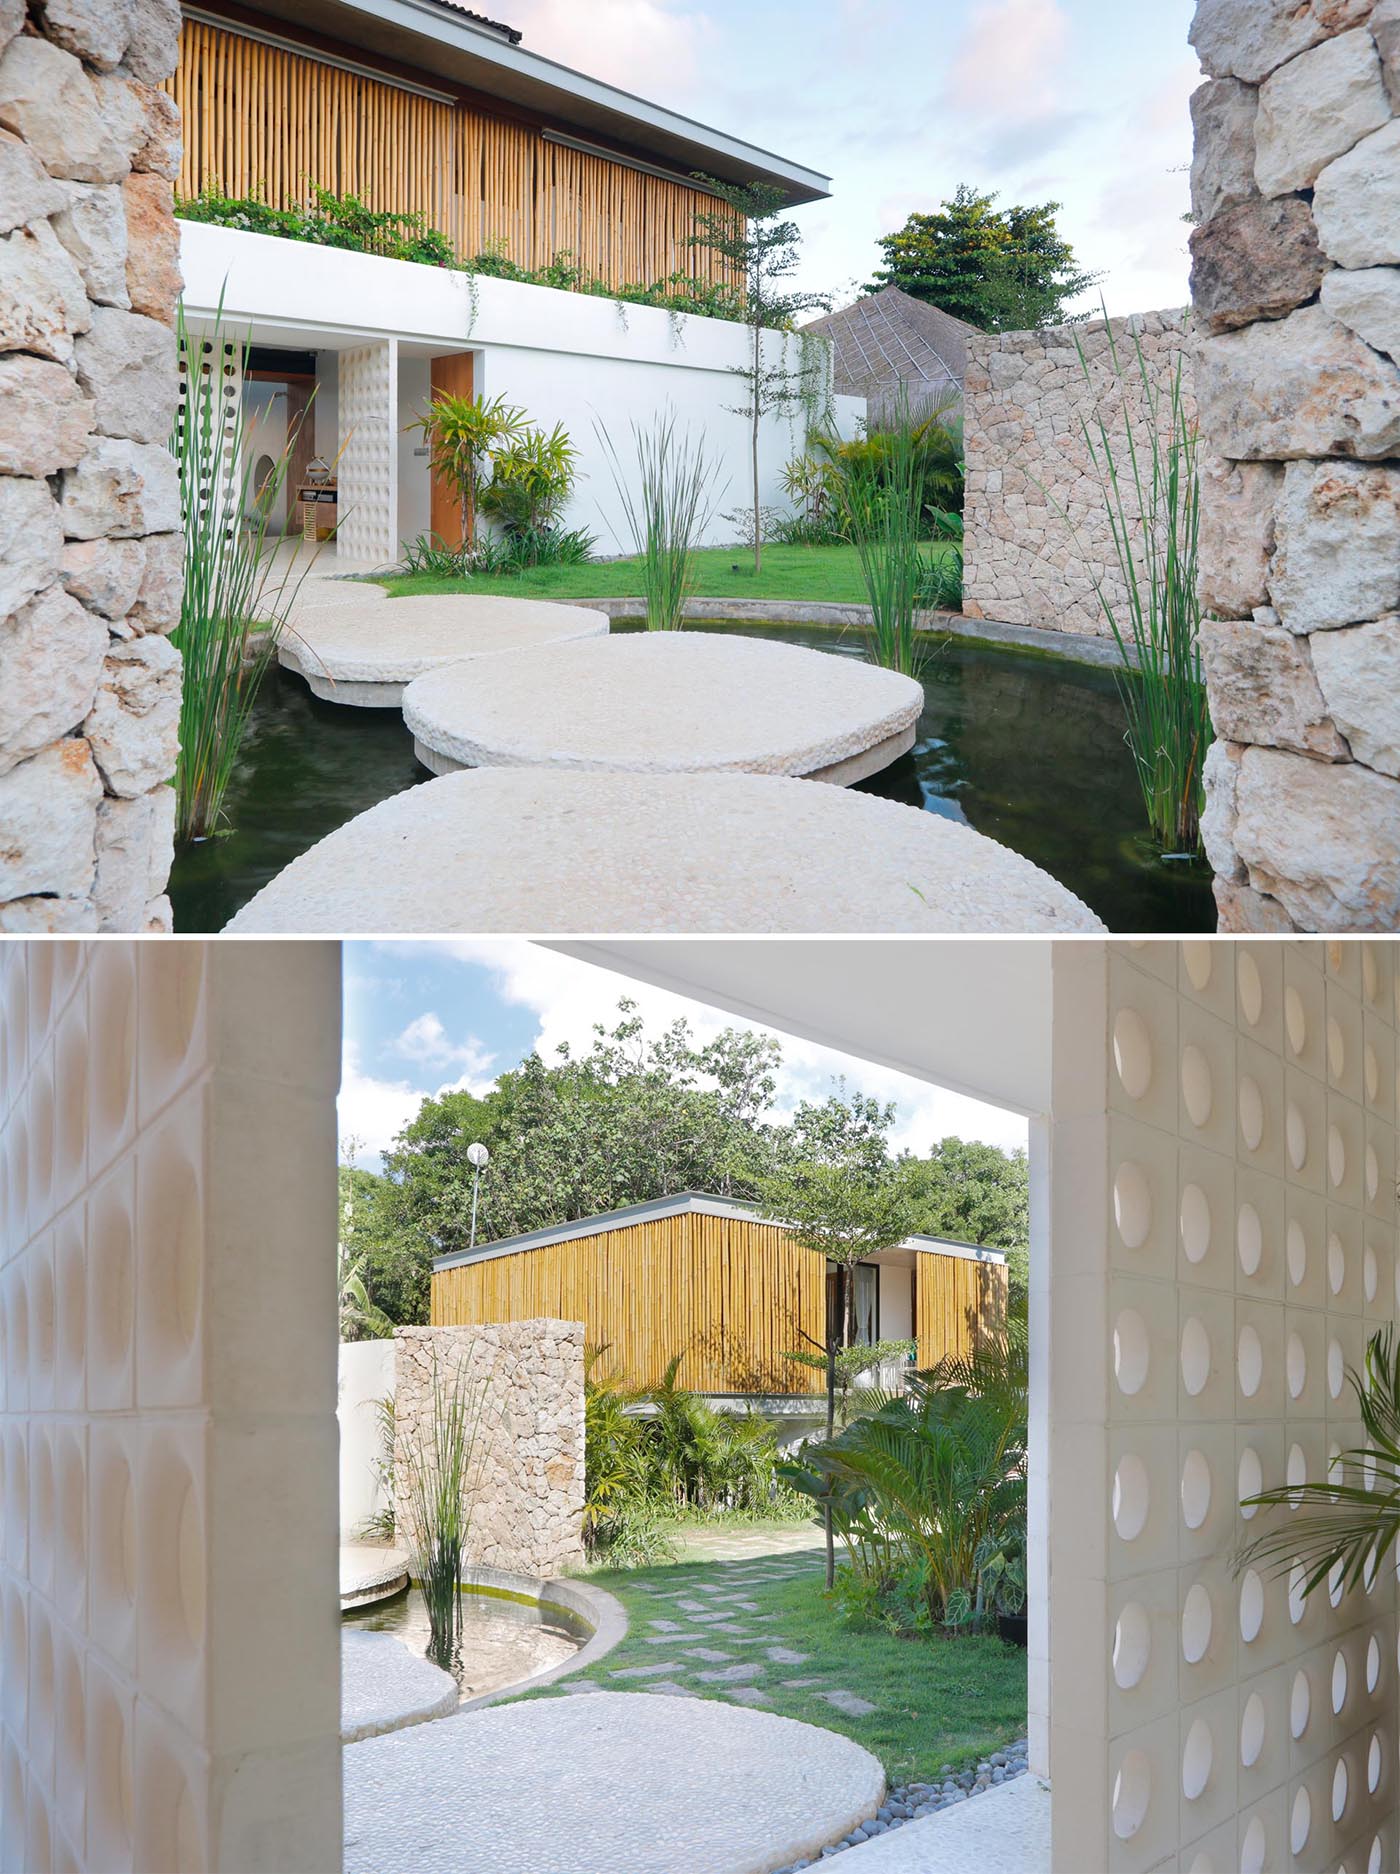 A modern beach home with a a white exterior and interior, includes bamboo screens for privacy and shade.